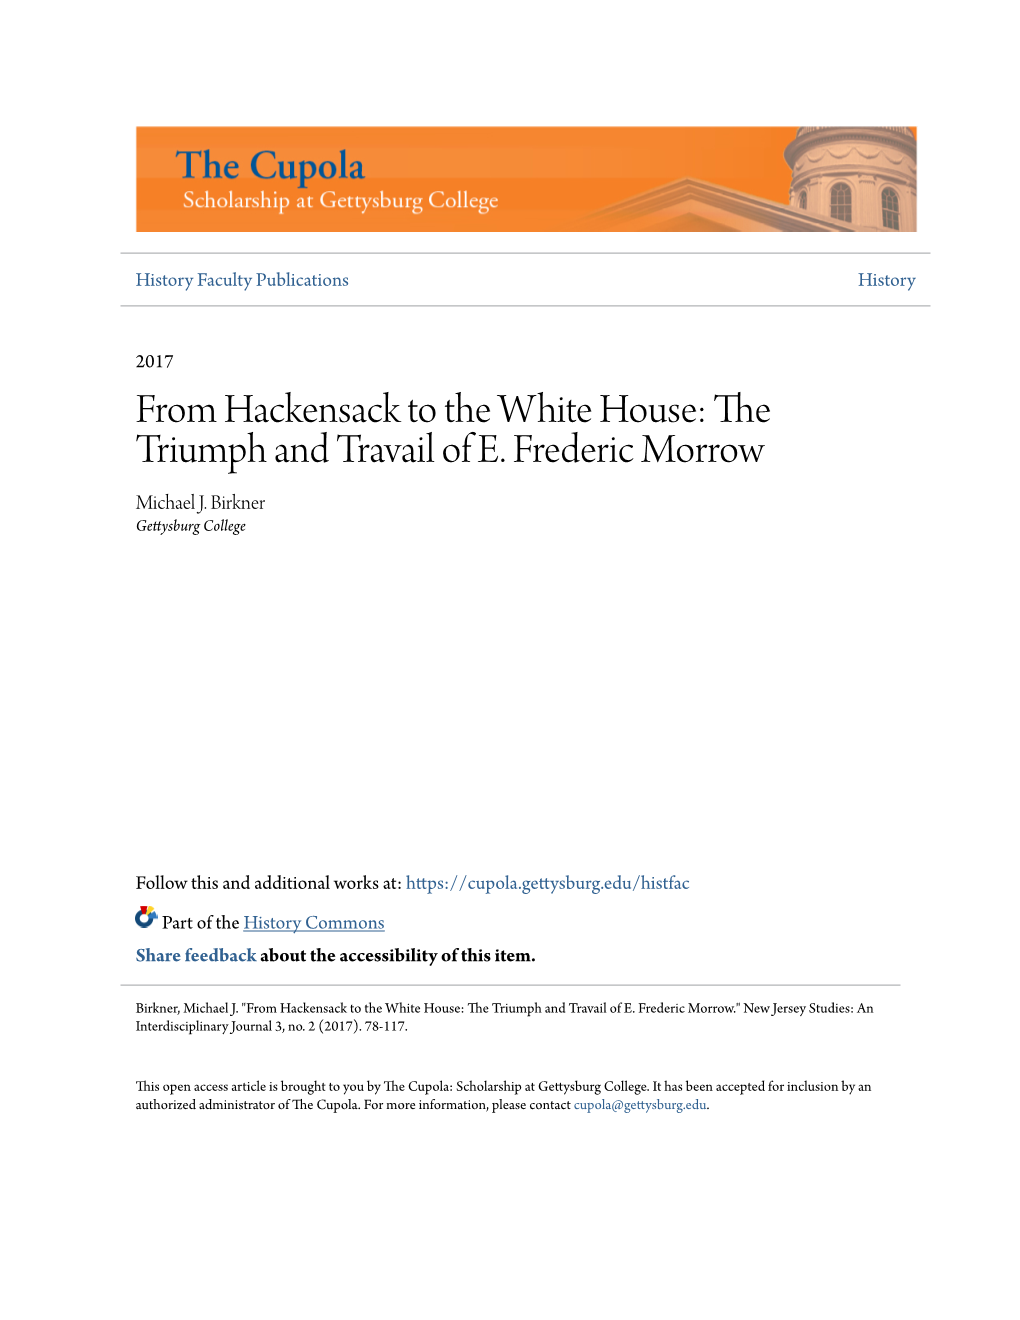 From Hackensack to the White House: the Triumph and Travail of E